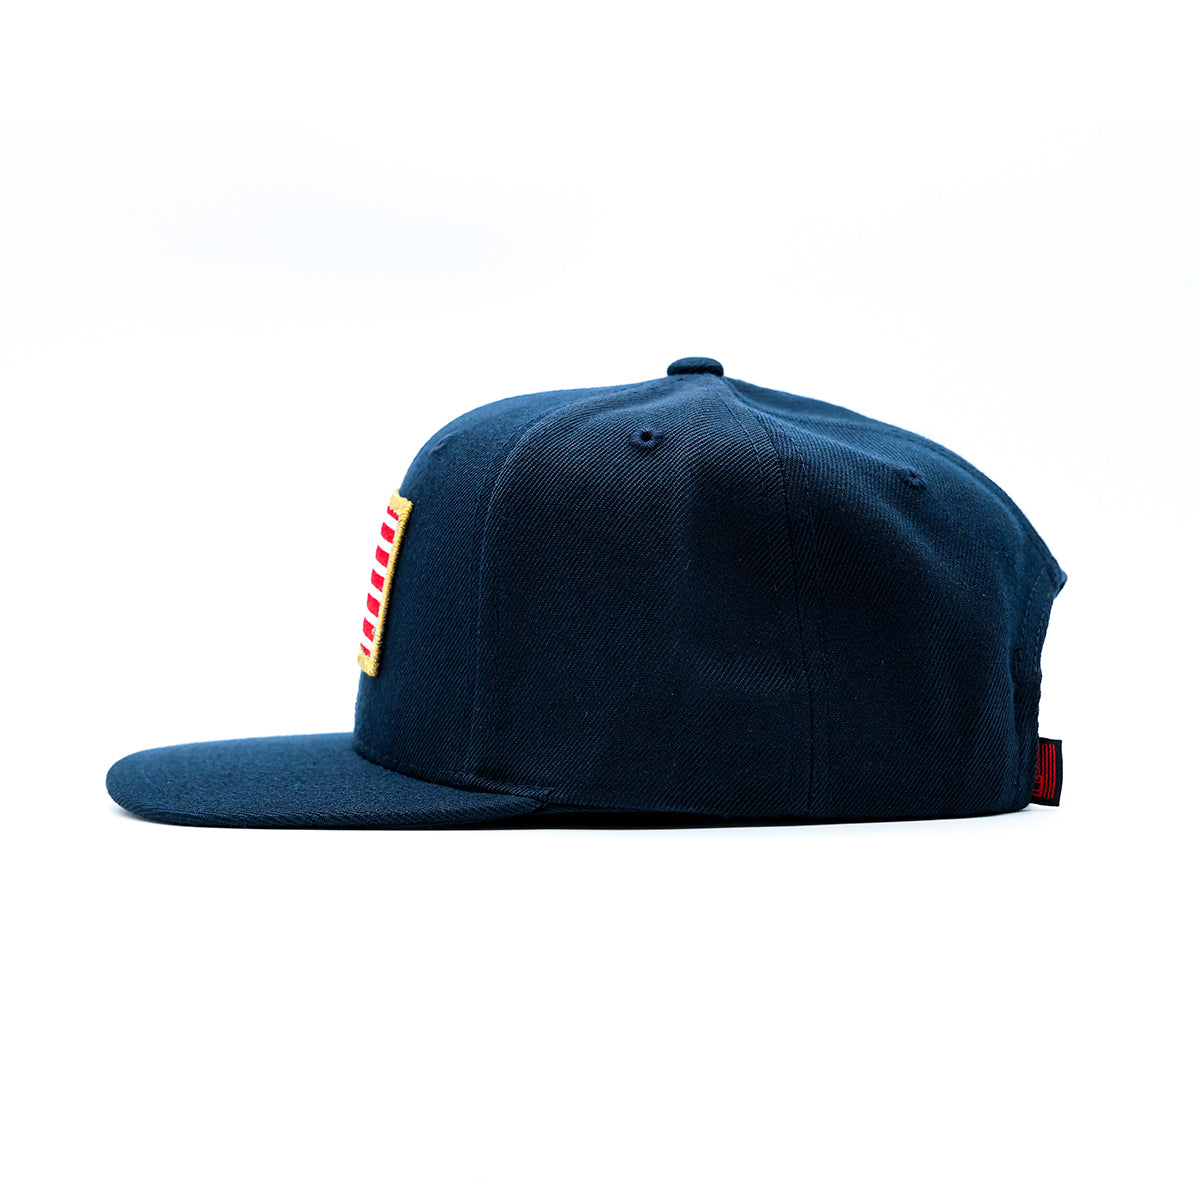 TMC Flag Patch Limited Edition Snapback - Navy/Red/White - Side